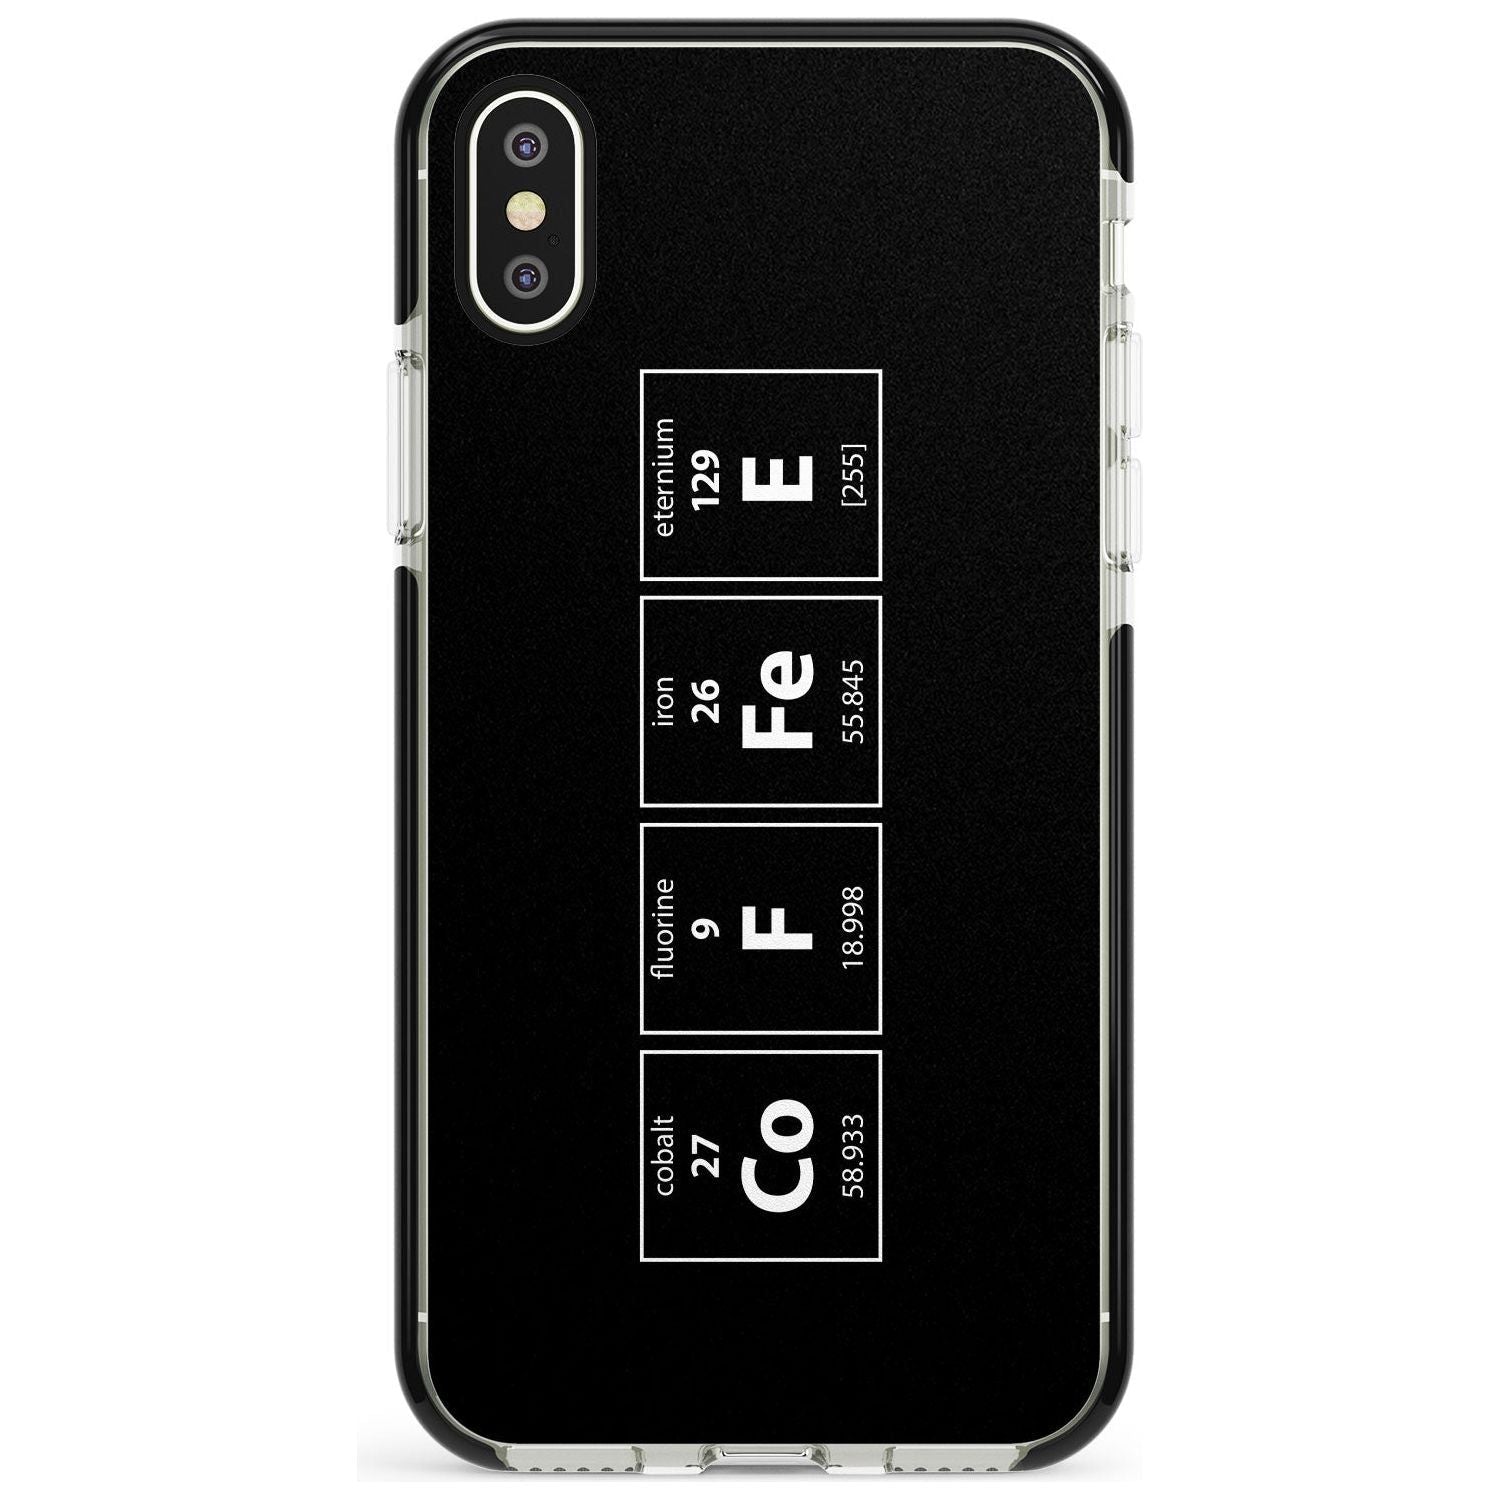 Coffee Element (Black) Black Impact Phone Case for iPhone X XS Max XR